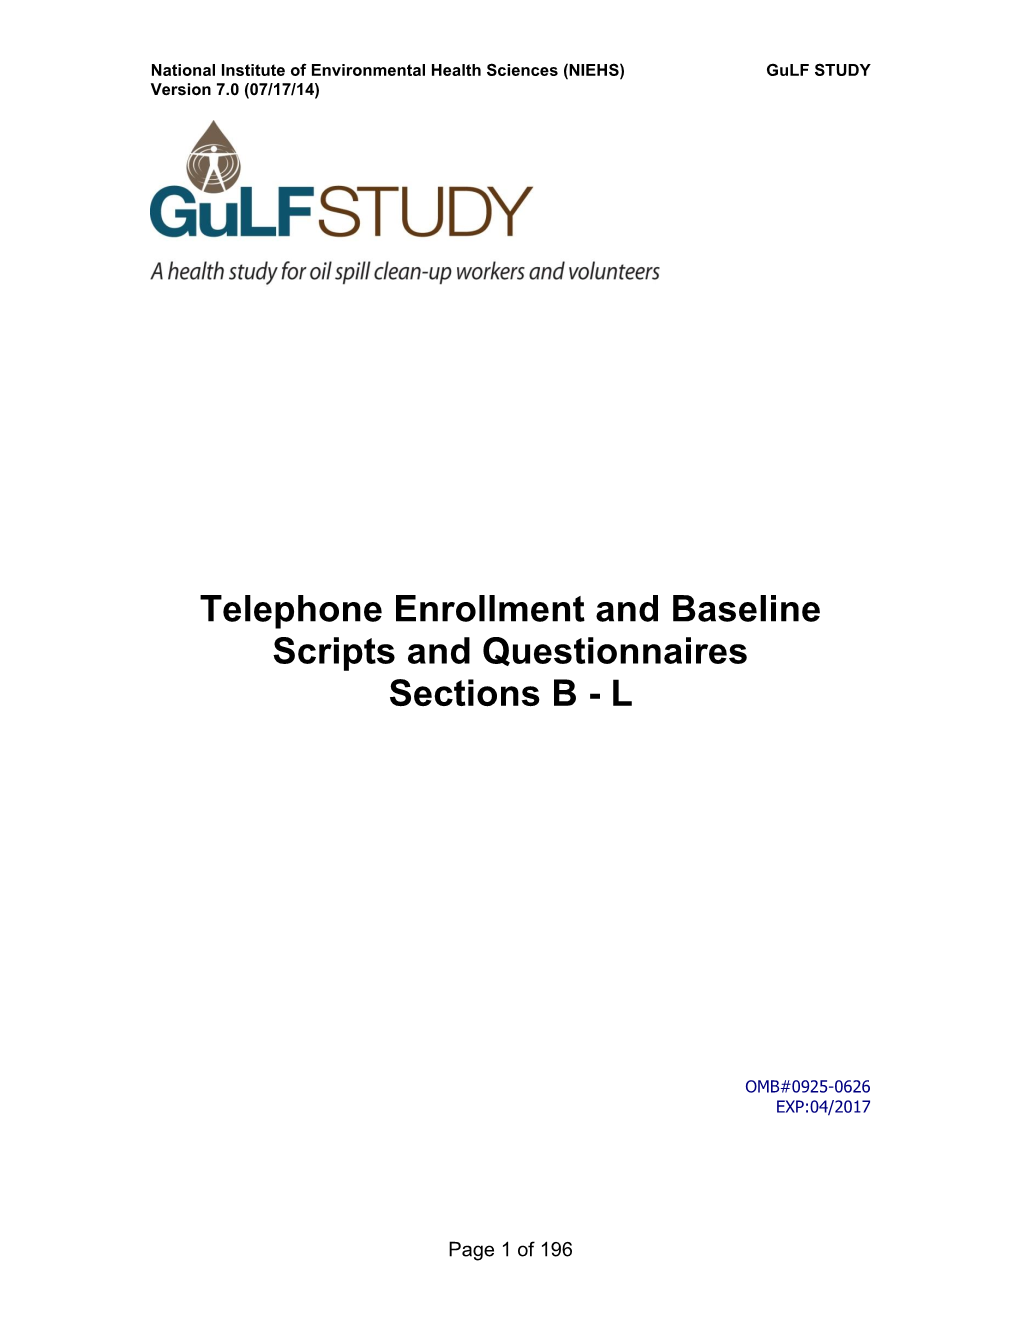 Telephone Enrollment and Baseline Scripts and Questionnaires Sections B - L